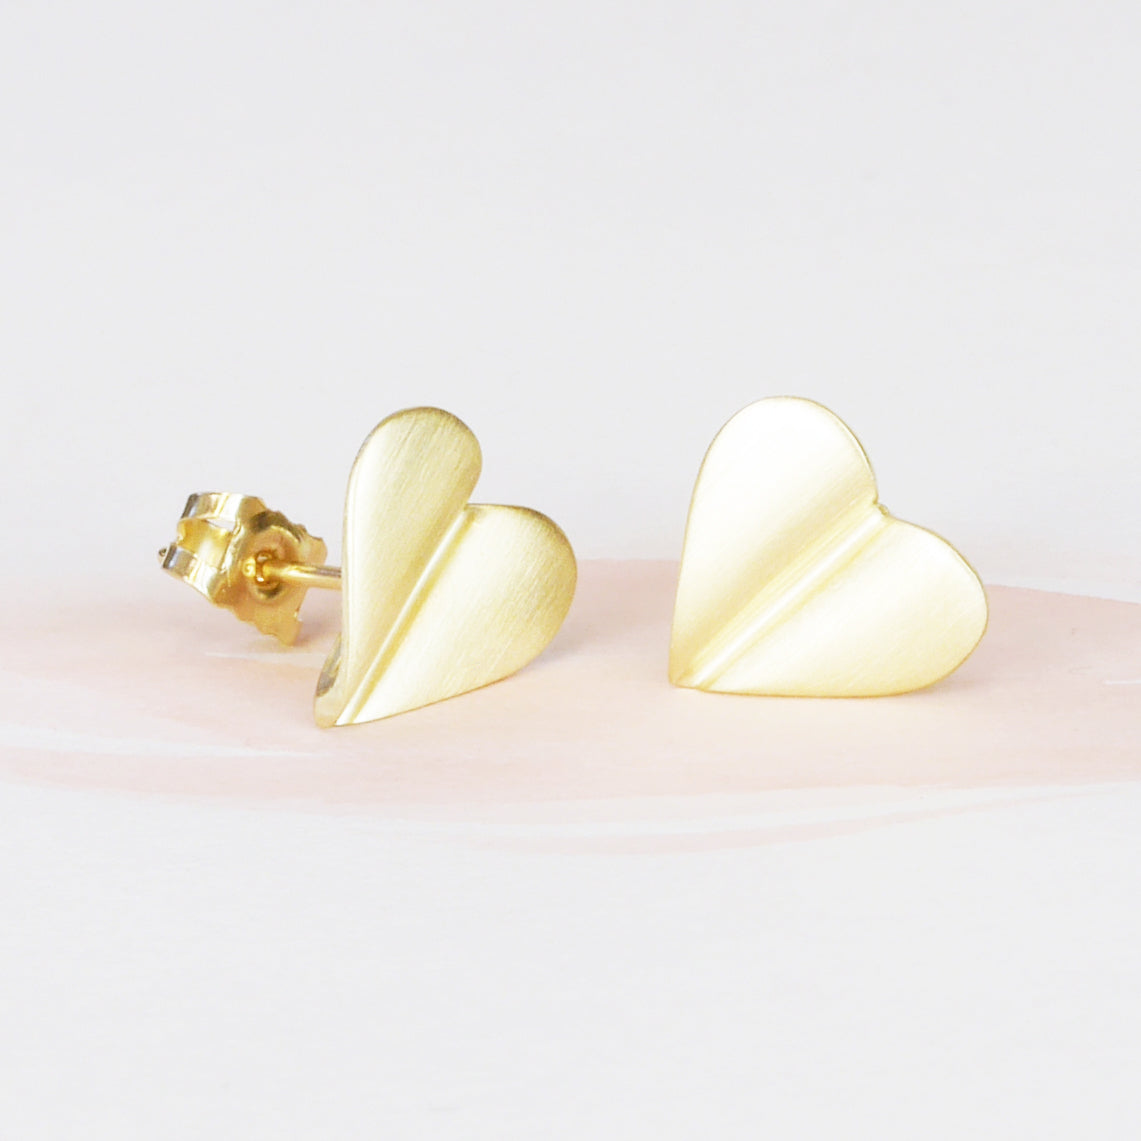 Brushed 9ct Gold Heart Stud Earrings